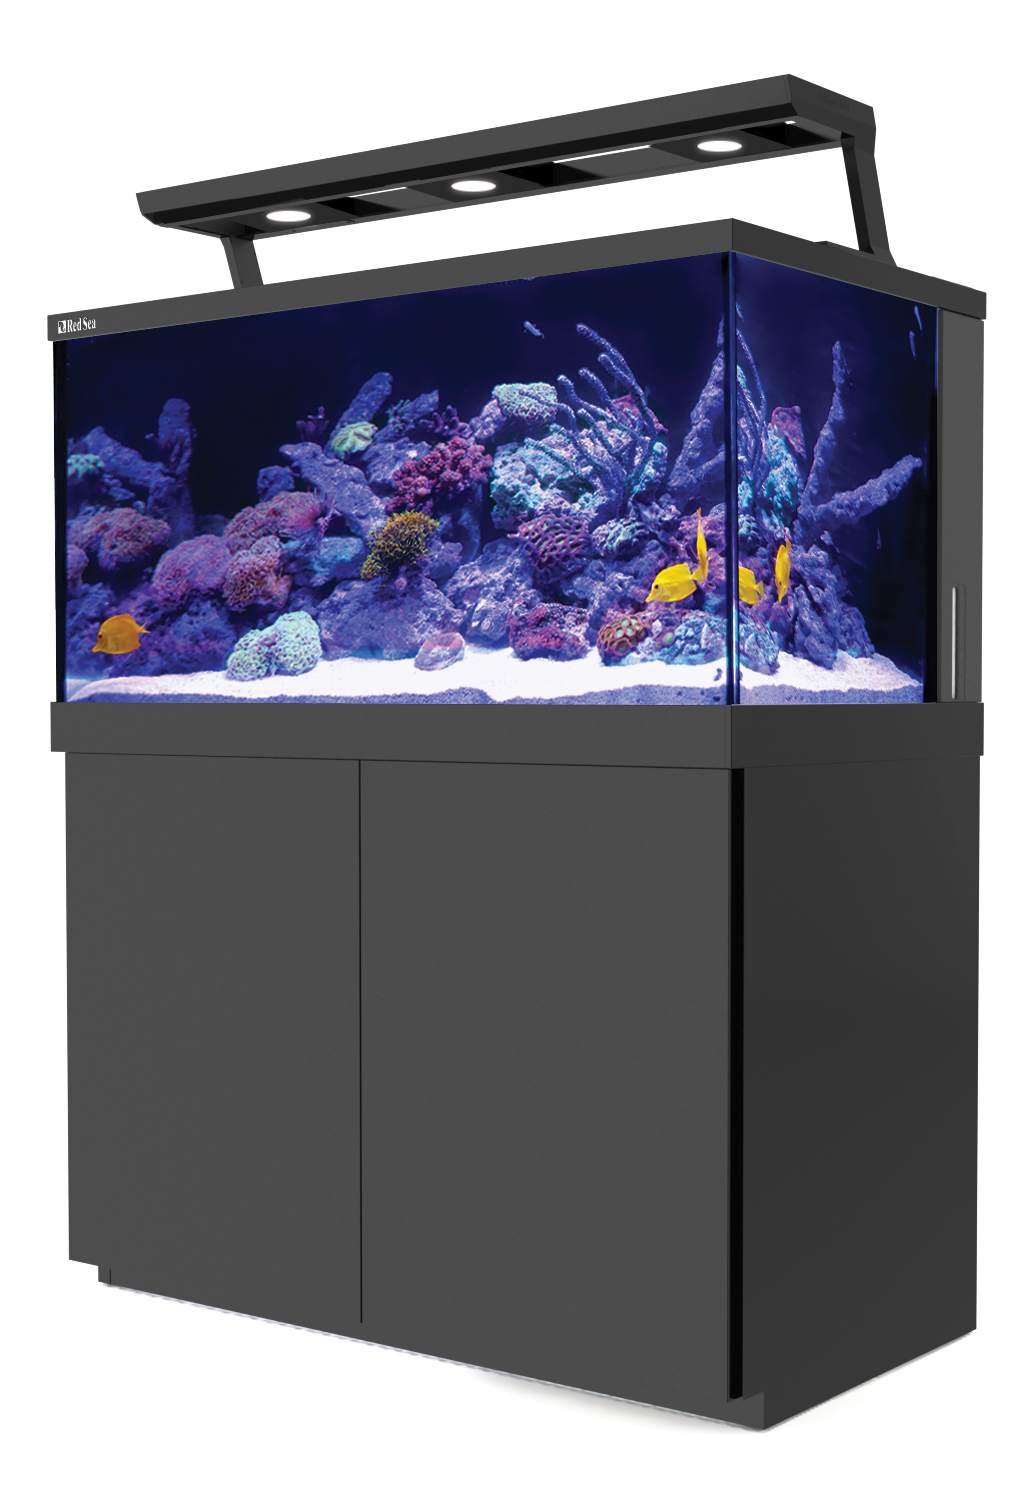 Red Sea MAX S-500 - Complete All-in-One LED Reef Aquarium 135 Gallons